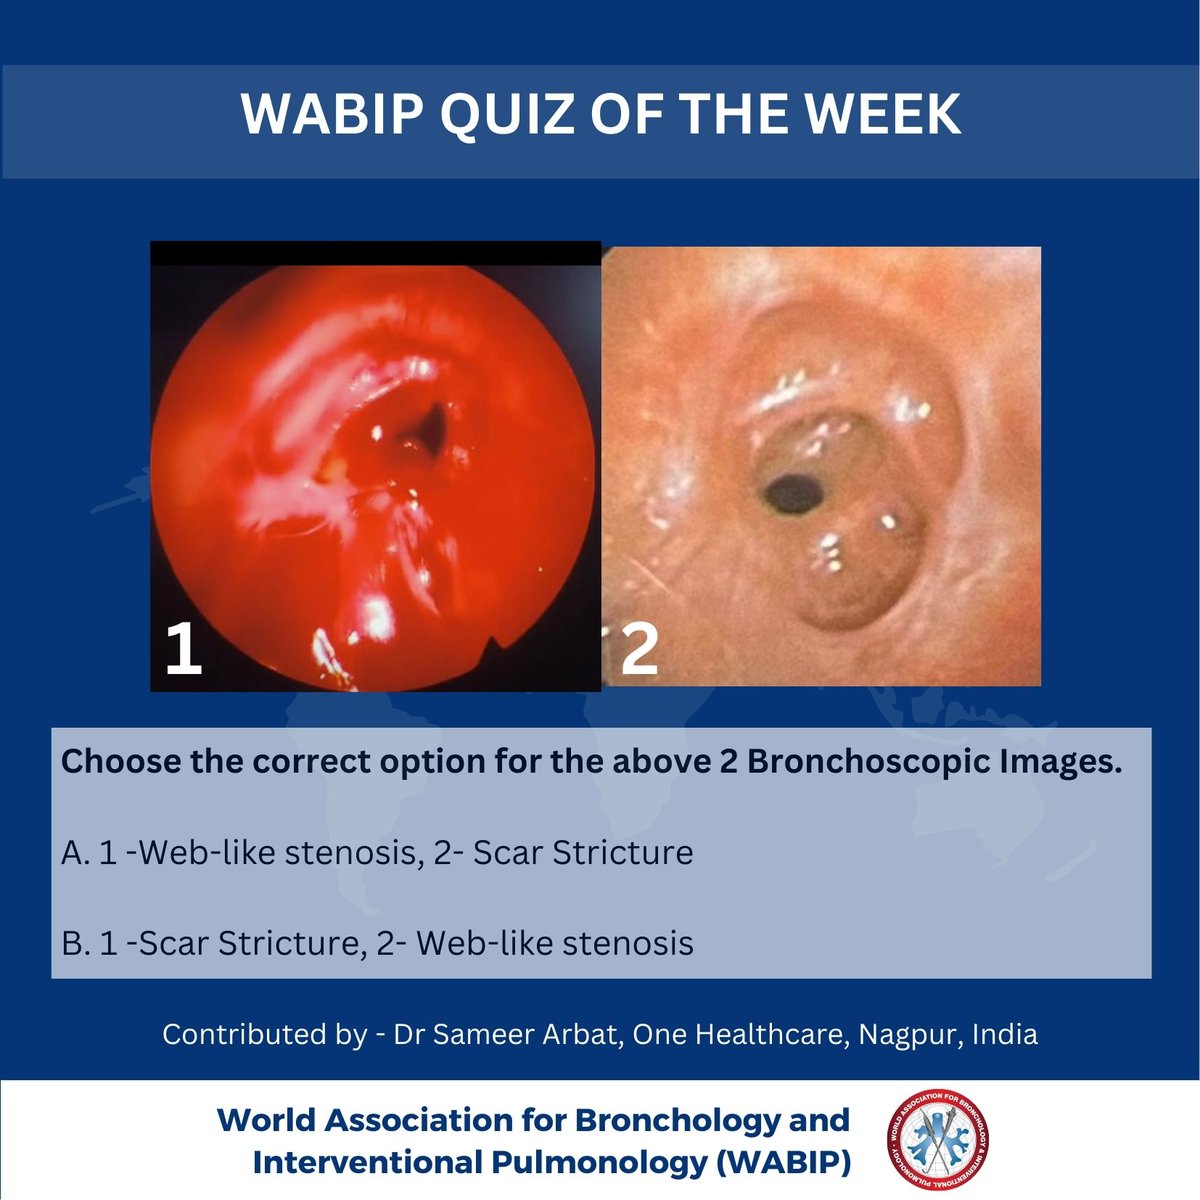 Are you excited for the WABIP “Quiz of the Week”?
Share your answers in comments.
#wabip #interventionalpulmonology #wabipnewsletter
#bronchoscopy #roboticbronchoscopy #ebus #cryotherapy
#stenting #lungcancer #lungnodule